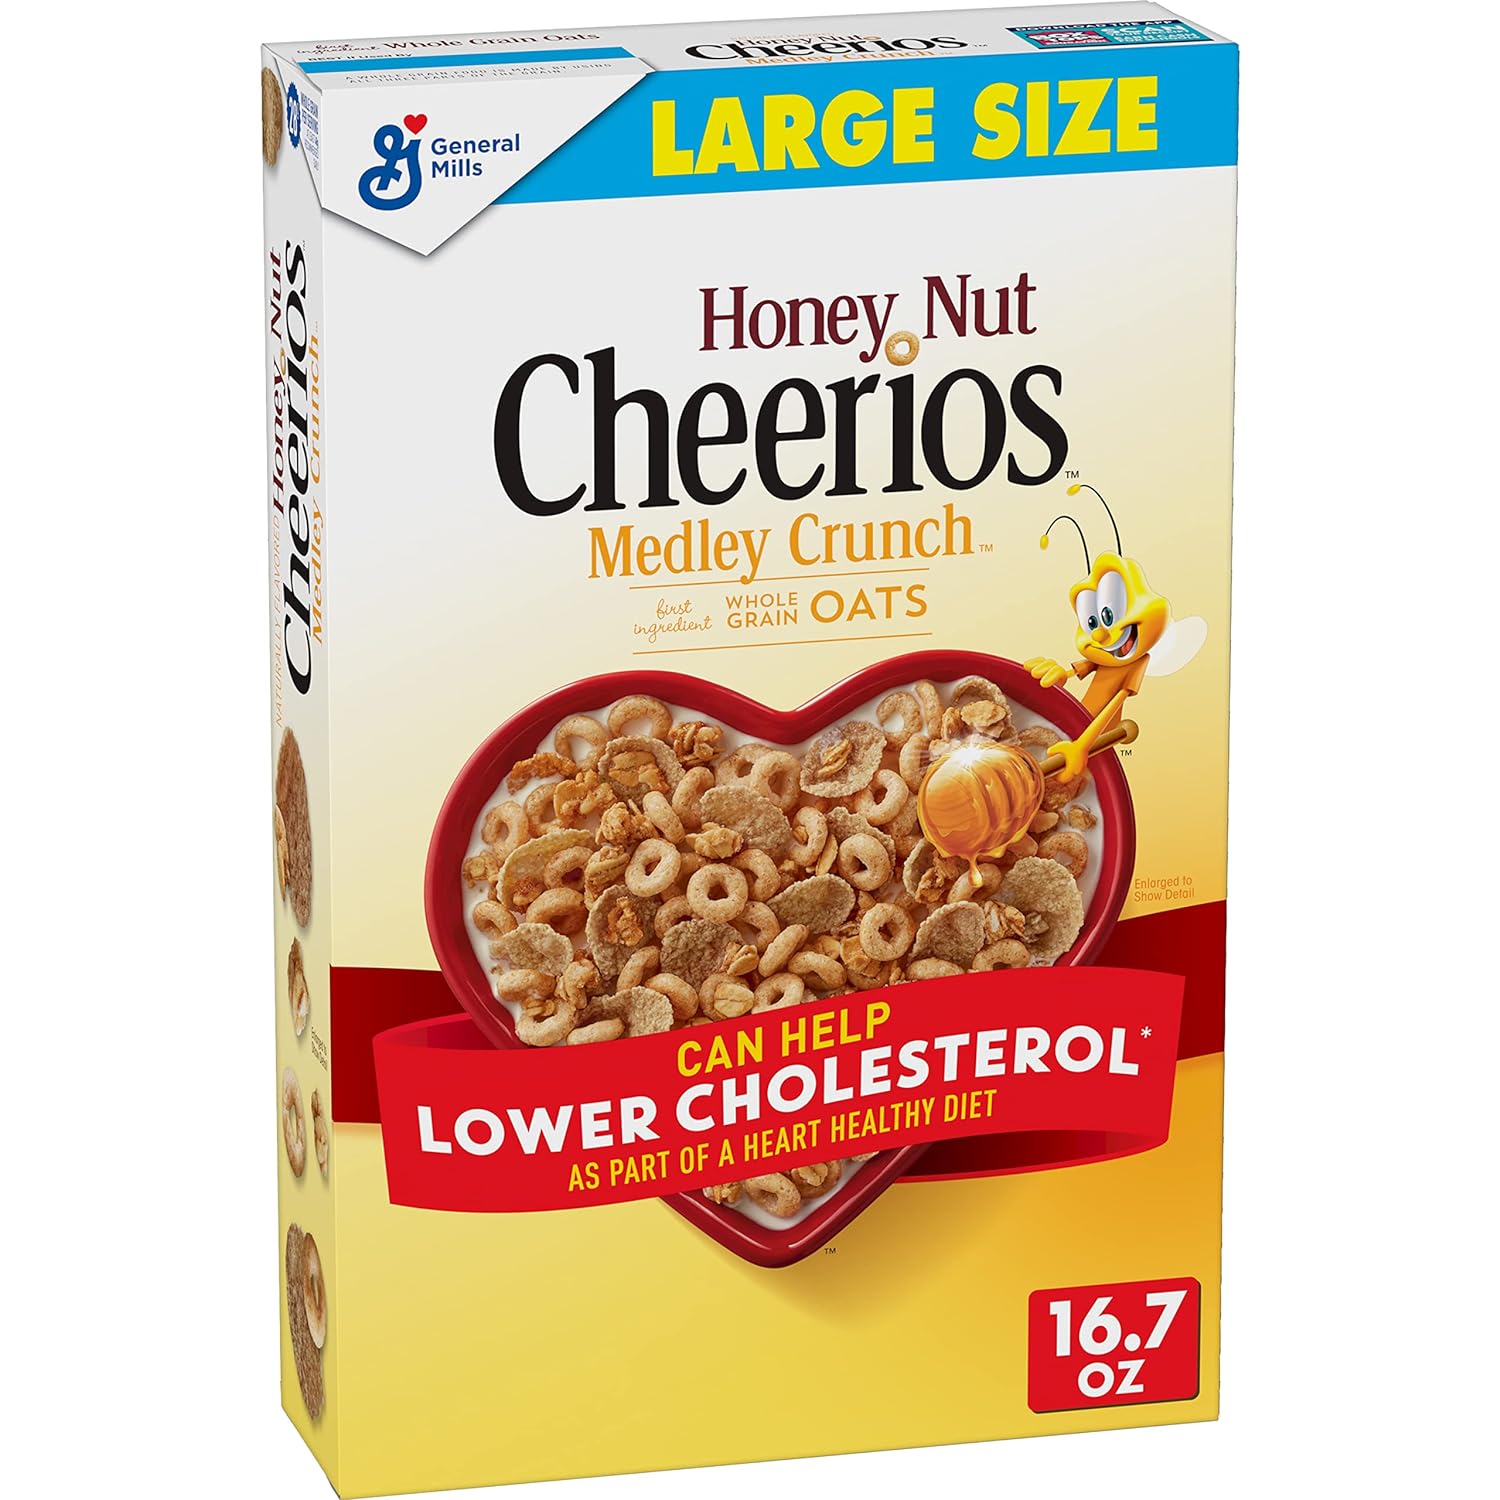 Honey Nut Cheerios Medley Crunch, Heart Healthy Cereal, Large Size, 16.7 OZ